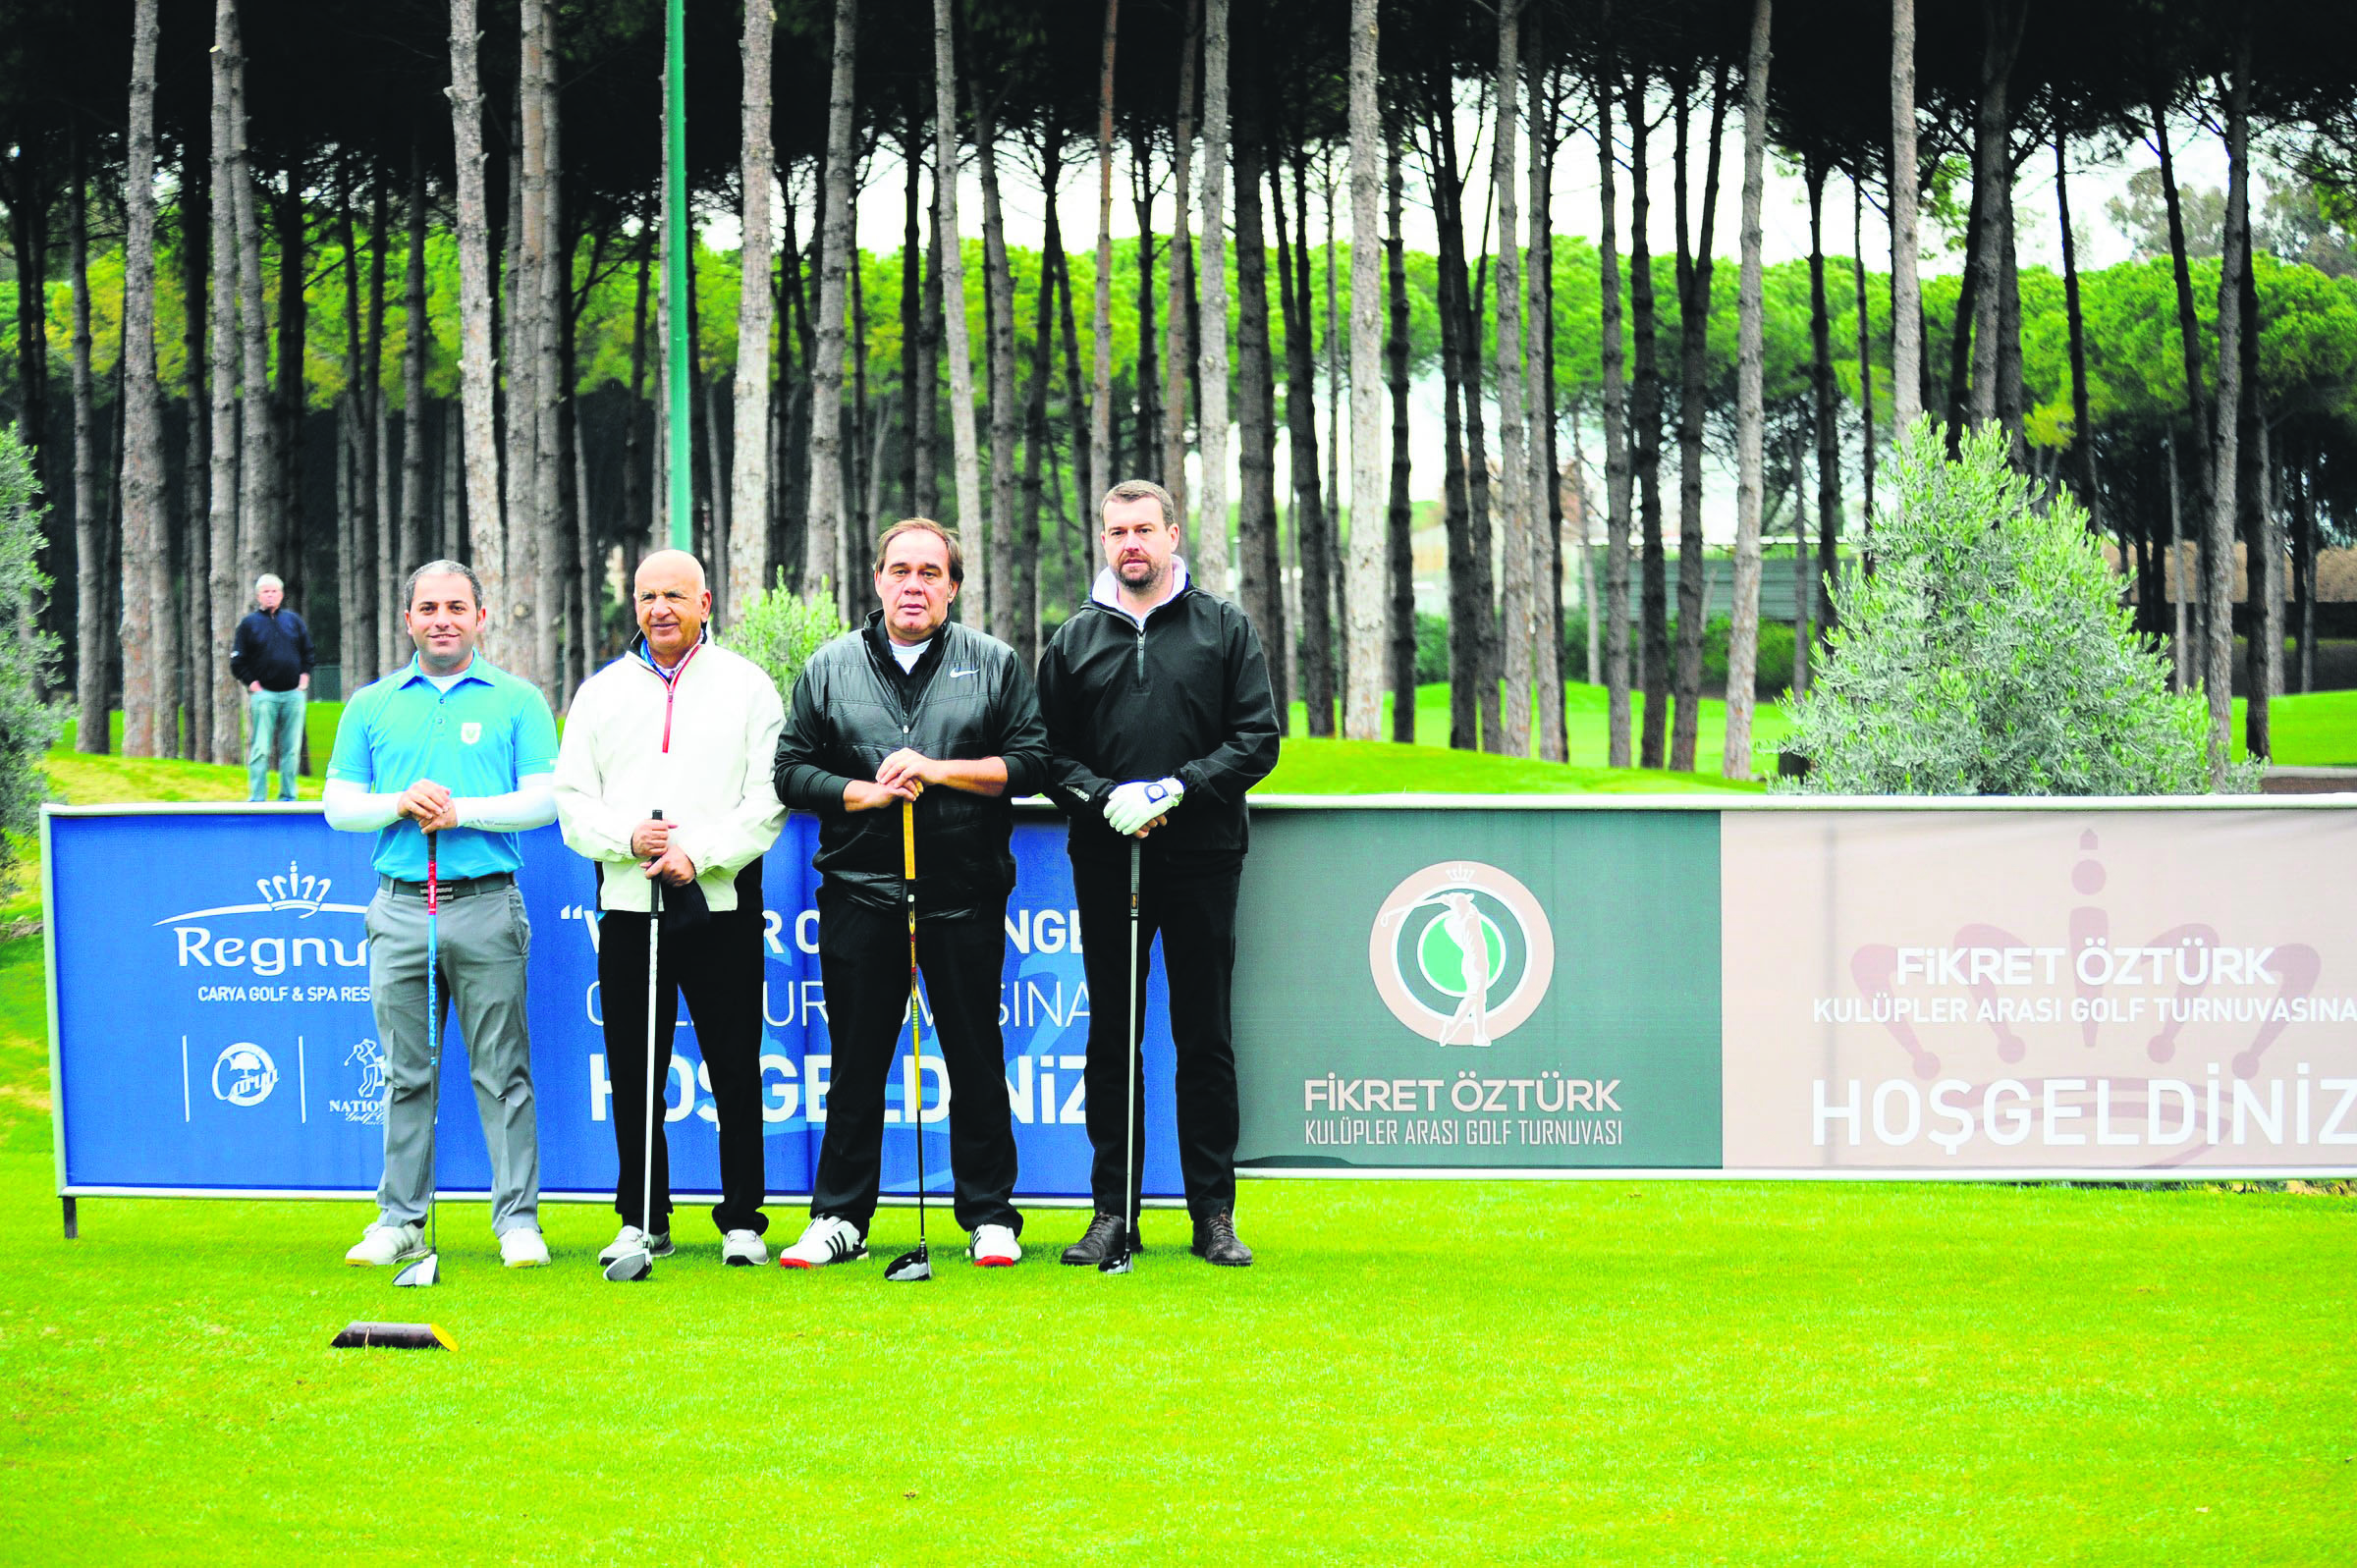 G20 host hotel presents tournament for Turkish golf clubs